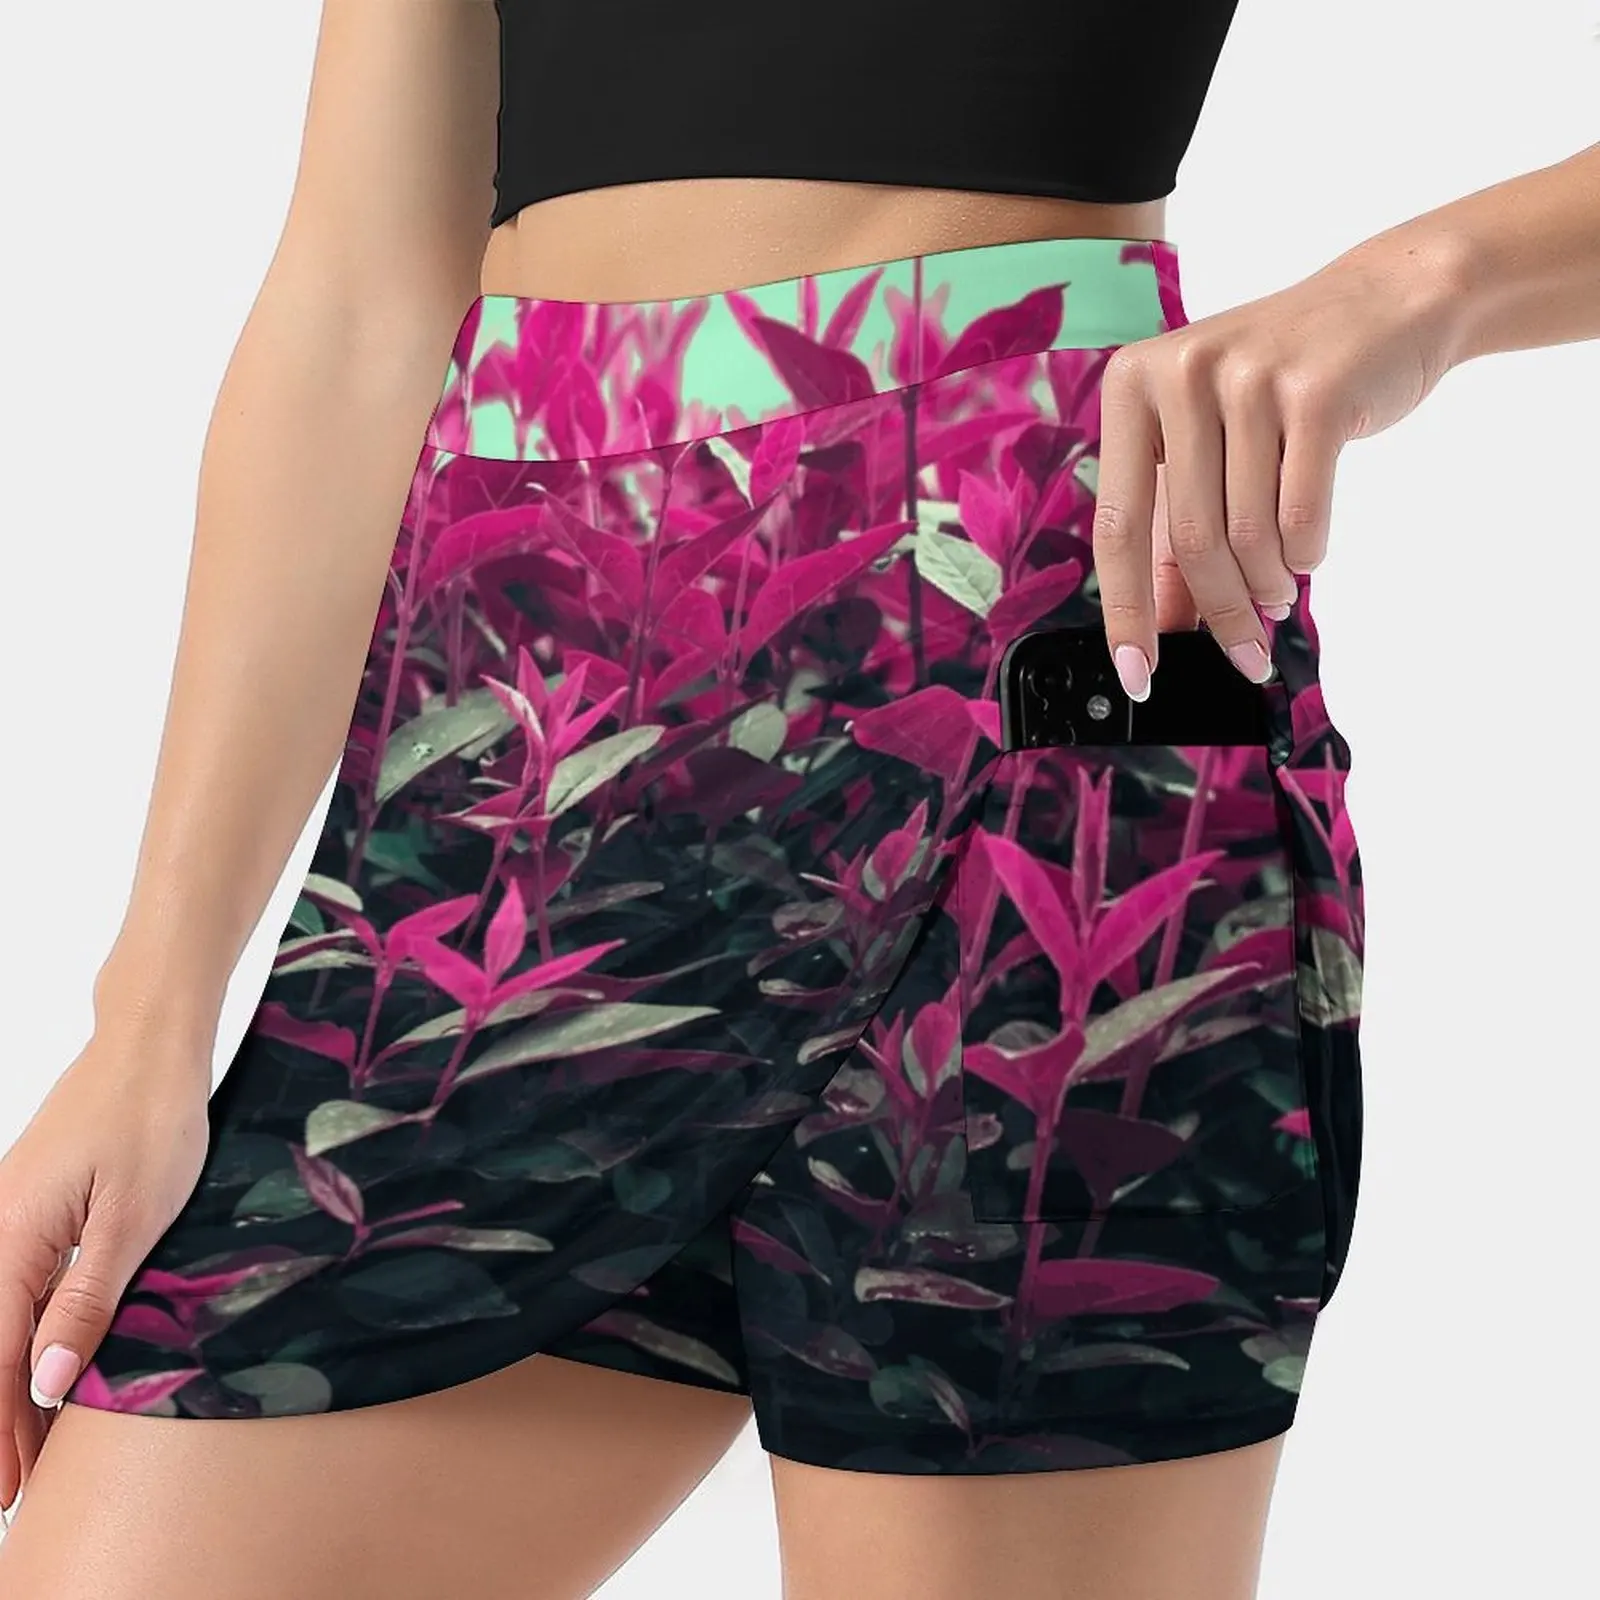 

Pink Spring Skirts Woman Fashion 2022 Pant Skirt Mini Skirts Office Short Skirt Pink Spring Floral Leaves Cyan Blue Nature